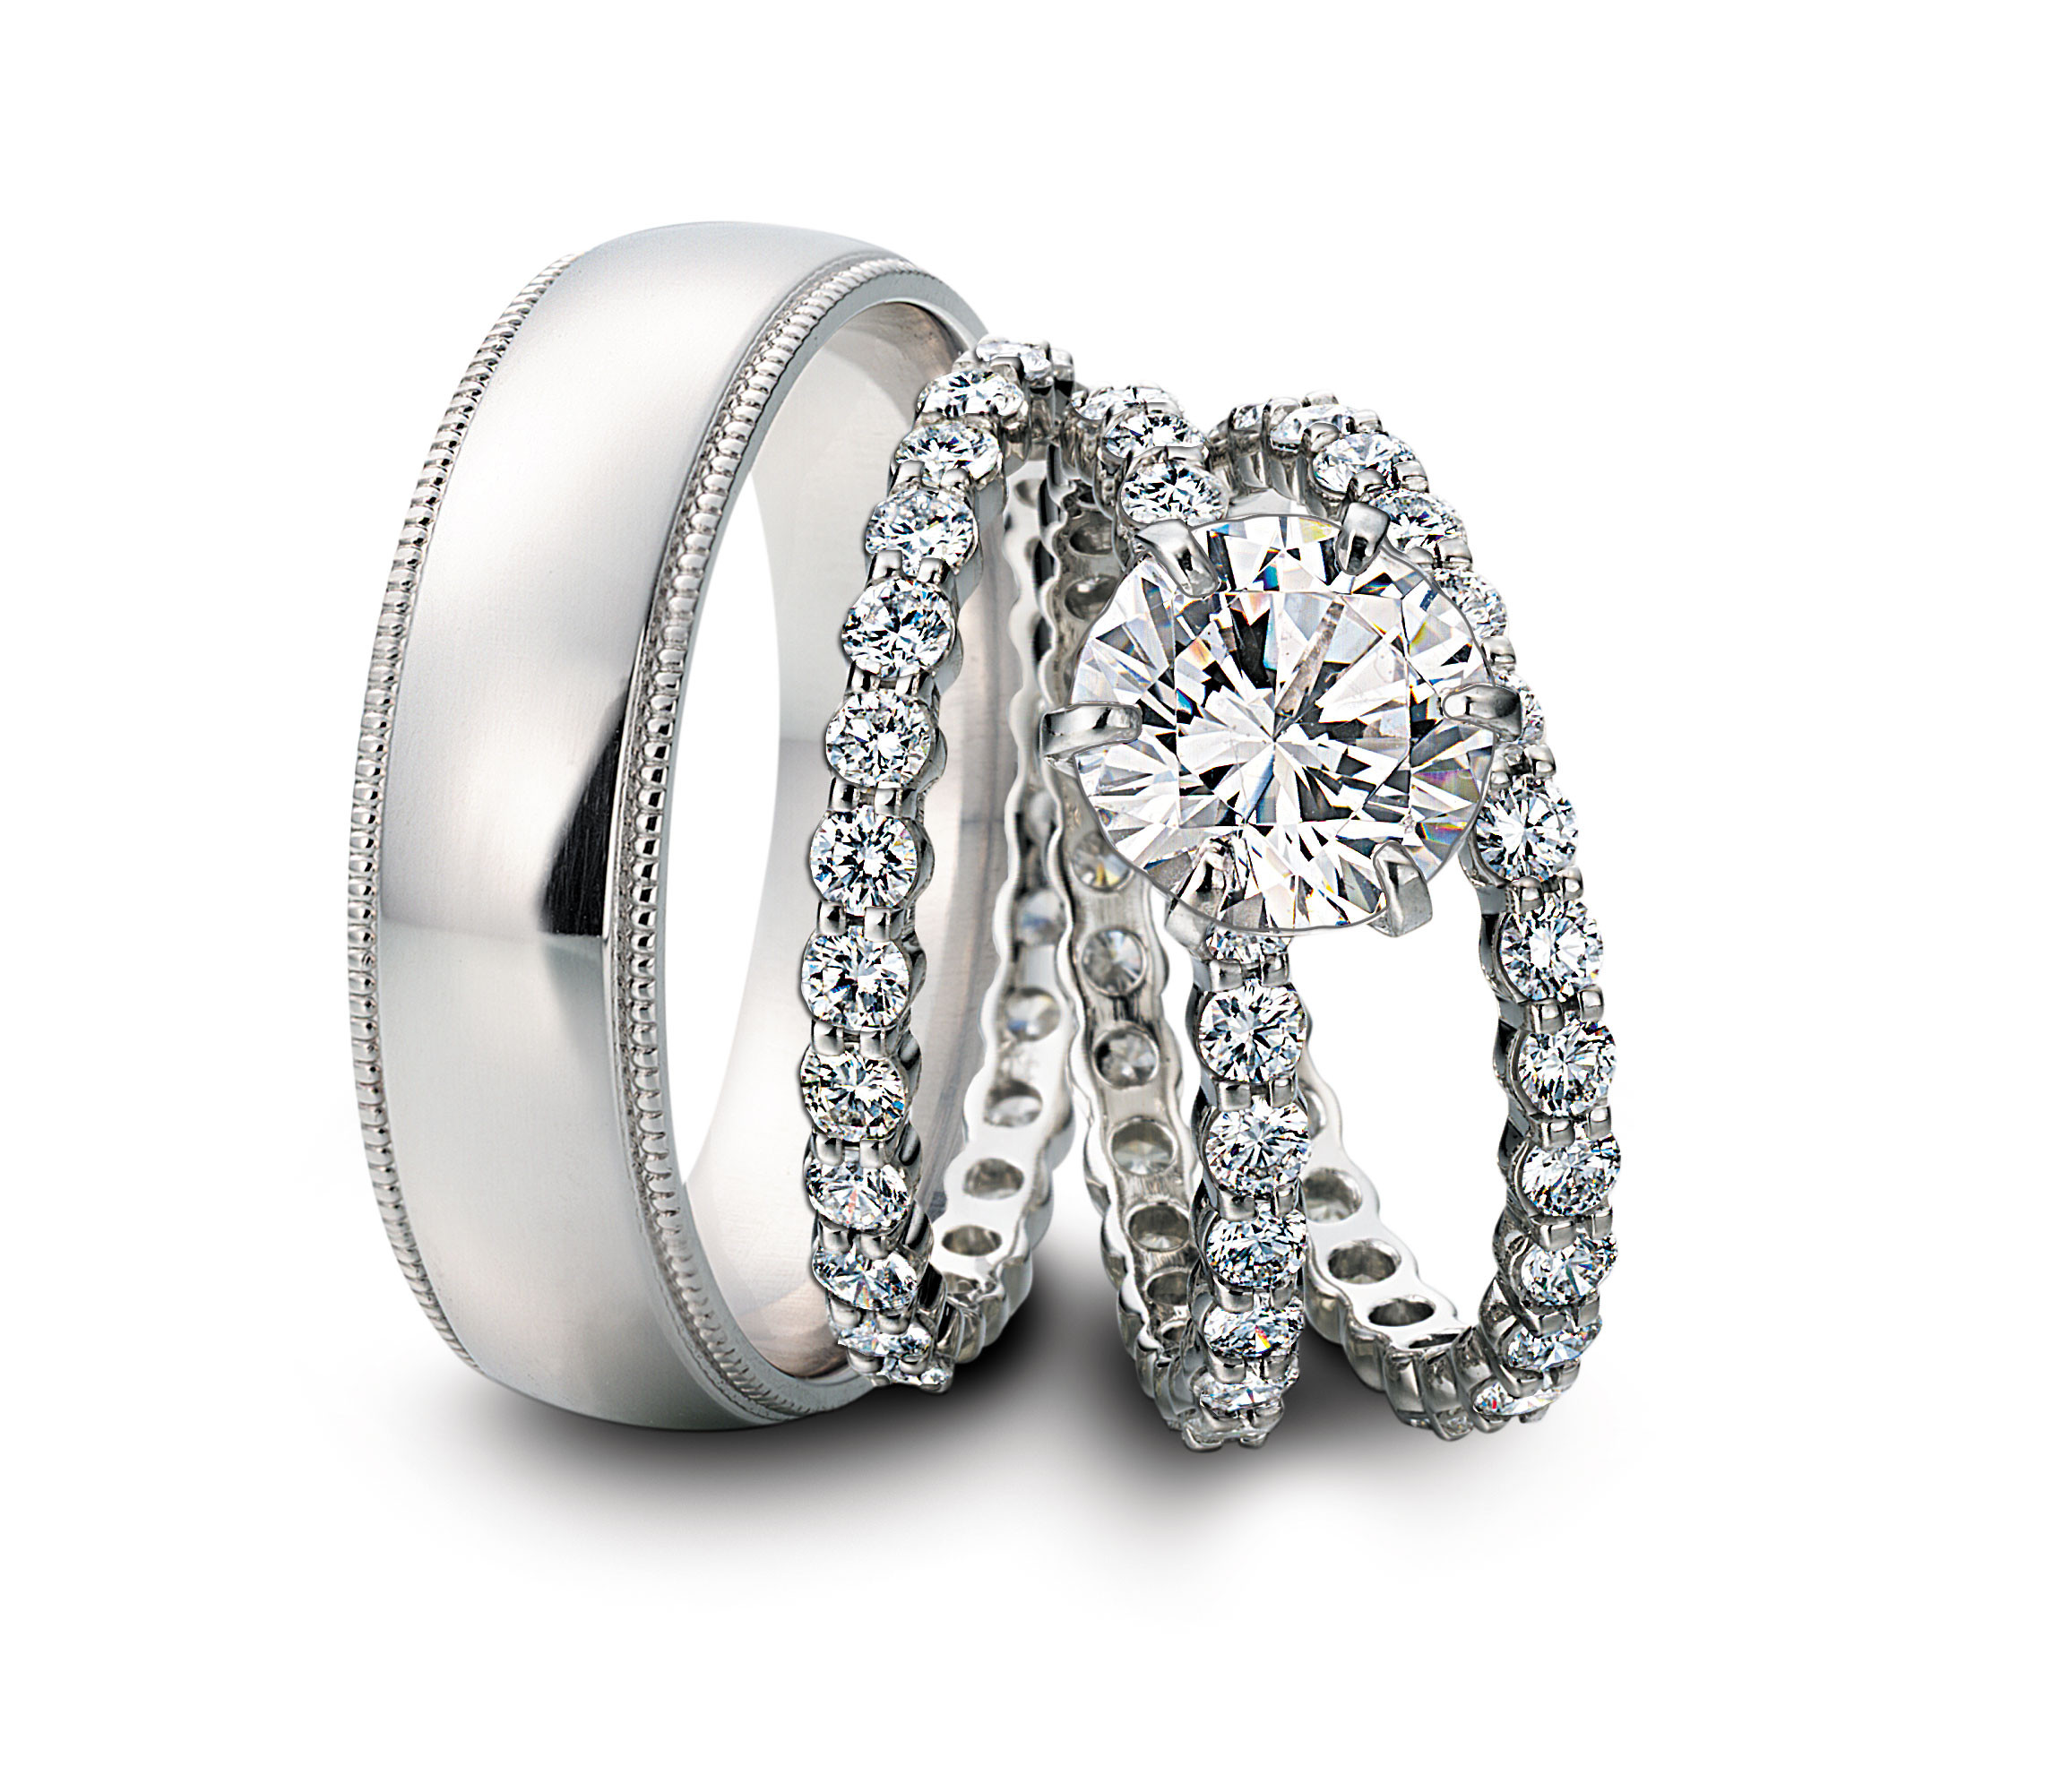 Matching Wedding Rings For Him And Her
 Should my wedding band be platinum or gold